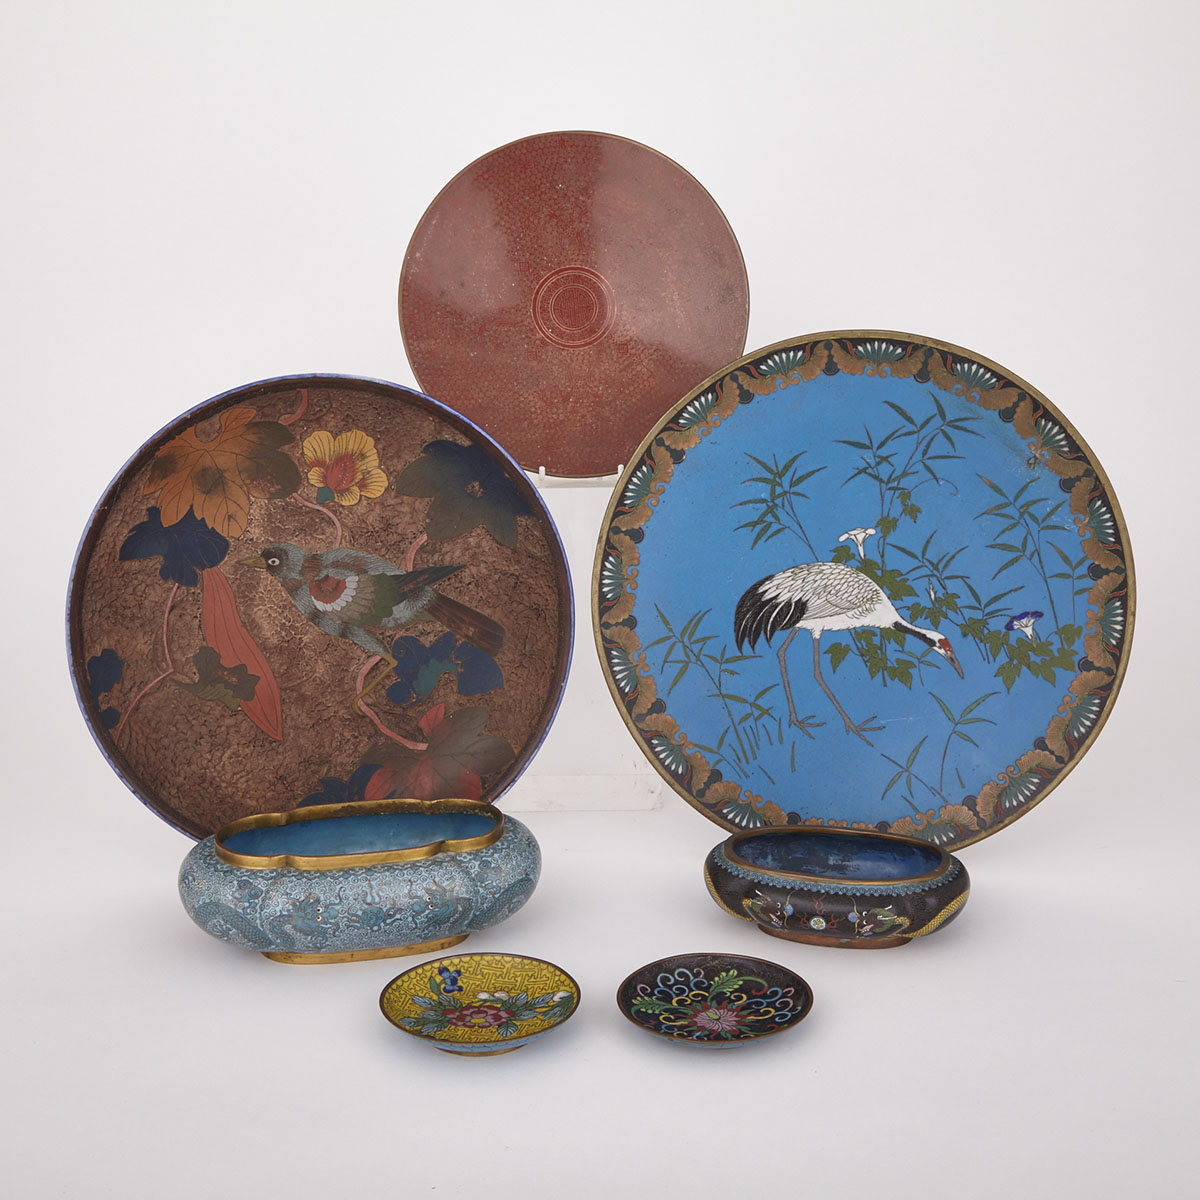 Group of Seven Cloisonne Dishes, early 20th Century